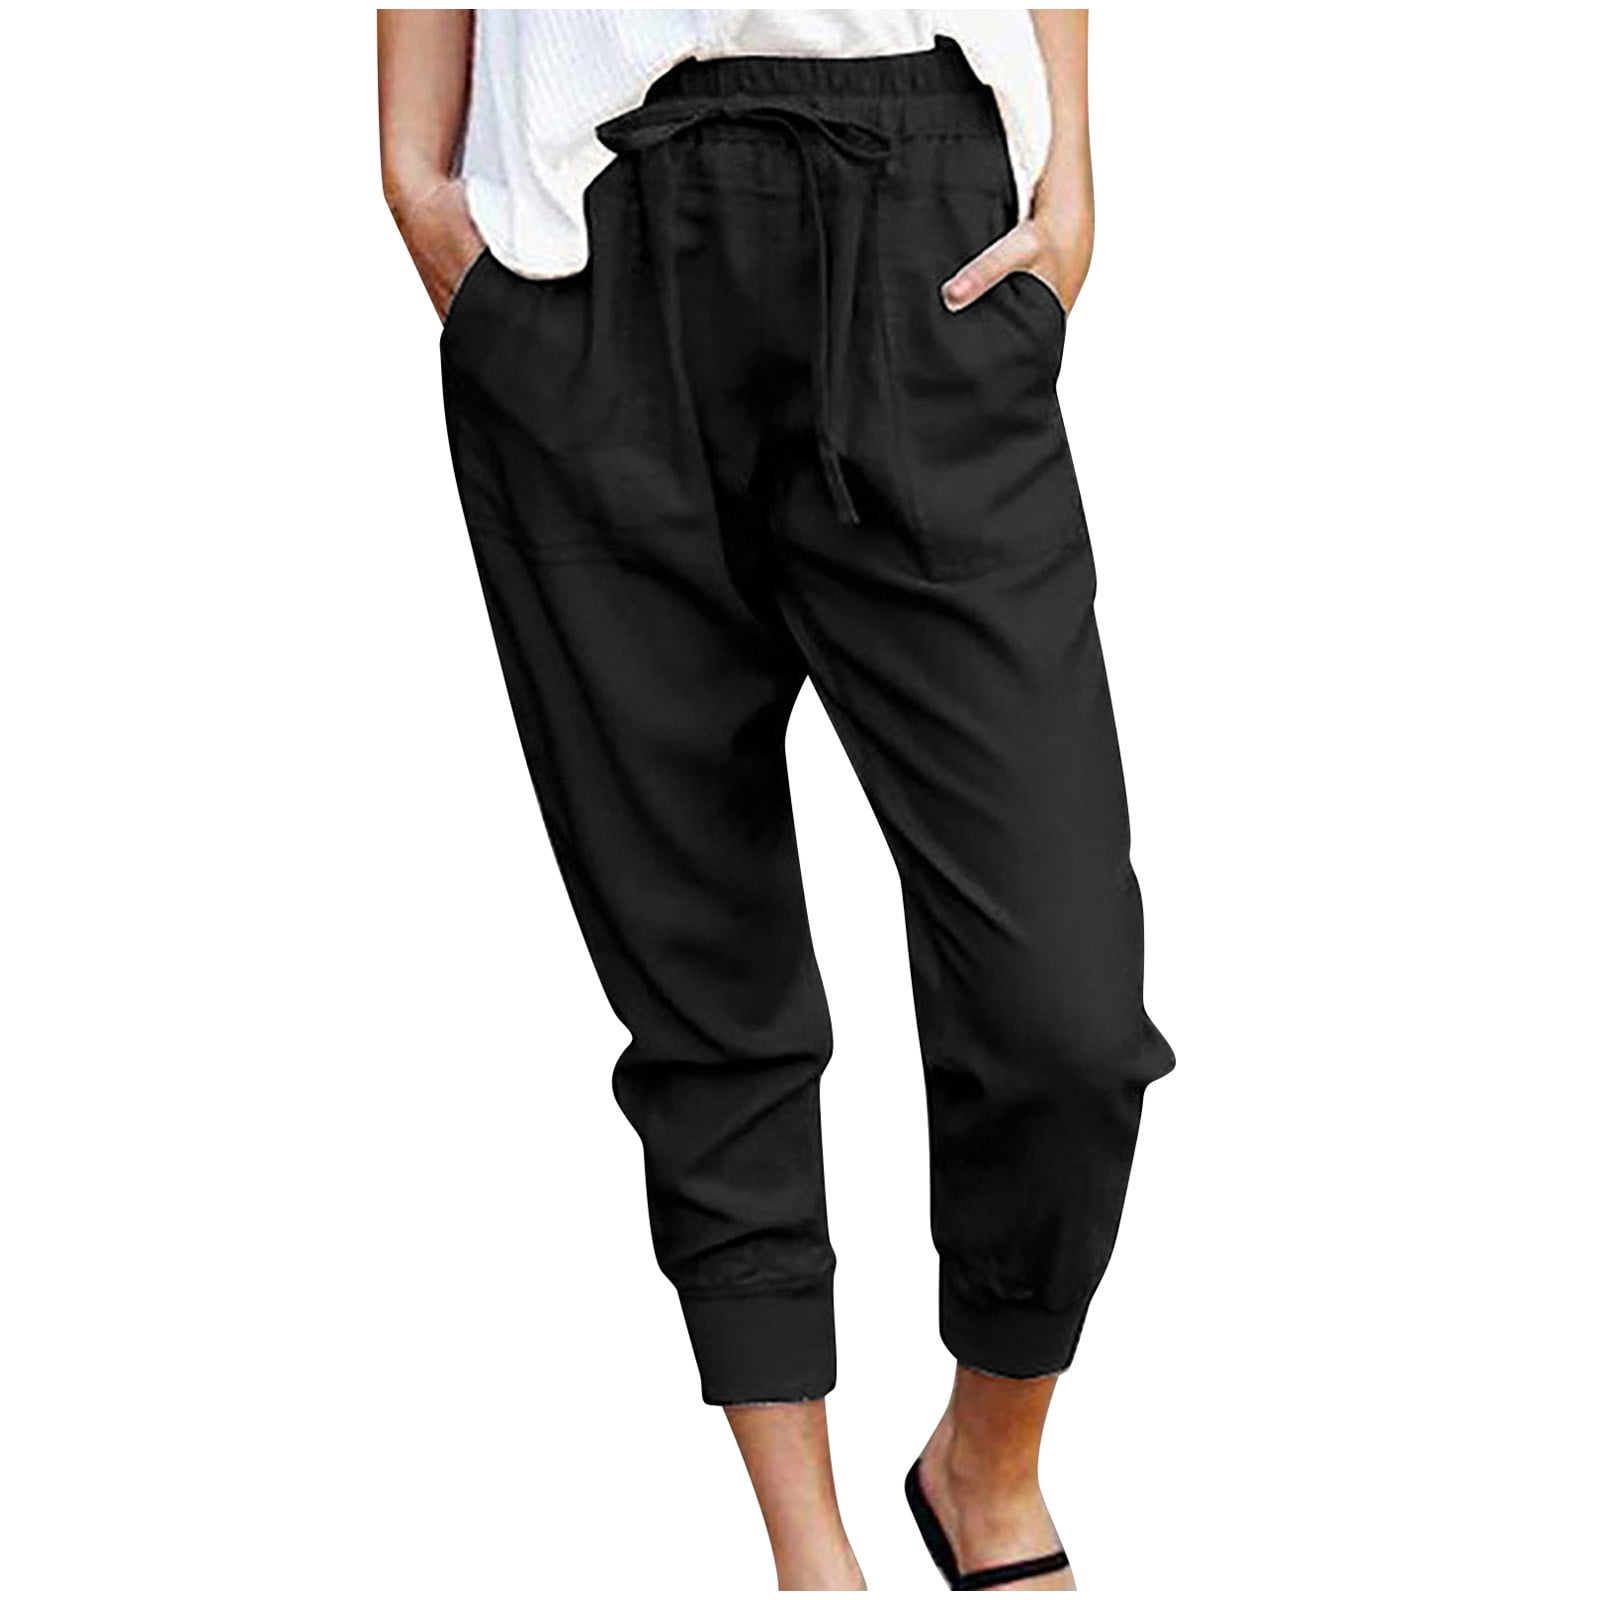 Women's Stretchy Bootcut Dress Pants Office Work Business Casual Slacks  with Pockets 30